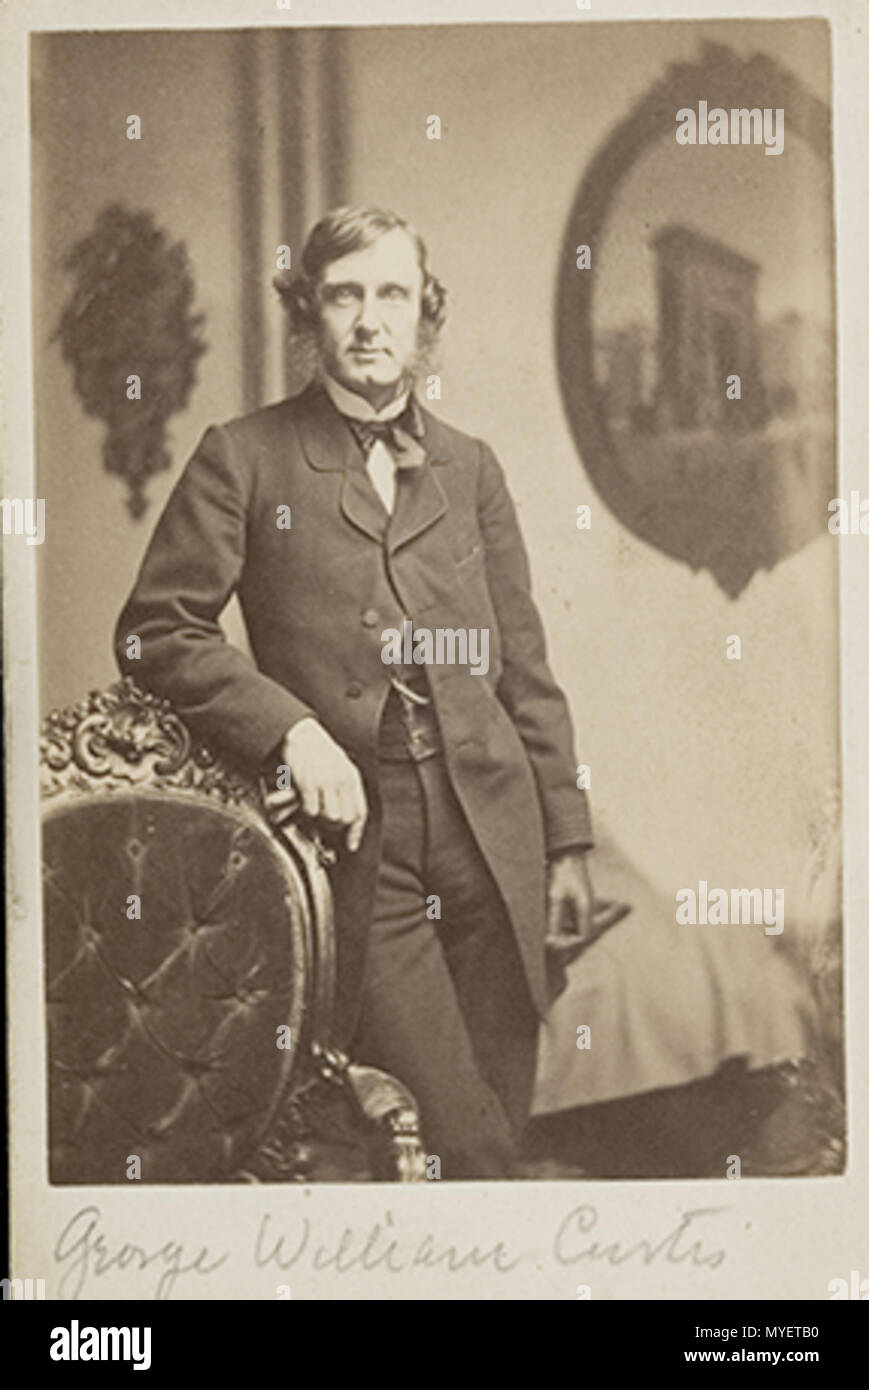 . Title: George William Curtis (1824-1892). Work Type: photograph; carte-de-visite. Creator: Whipple, John Adams (1822 - 1891), American. Date: 1860-1864. Dimensions: sight: 10 x 6 cm (3 15/16 x 2 3/8 in.). Materials/Techniques: Albumen silver print on card. Repository: Harvard Art Museum. between 1860 and 1864. John A. Whipple 207 GeorgeWilliamCurtis 1860s byJAWhipple Harvard Stock Photo